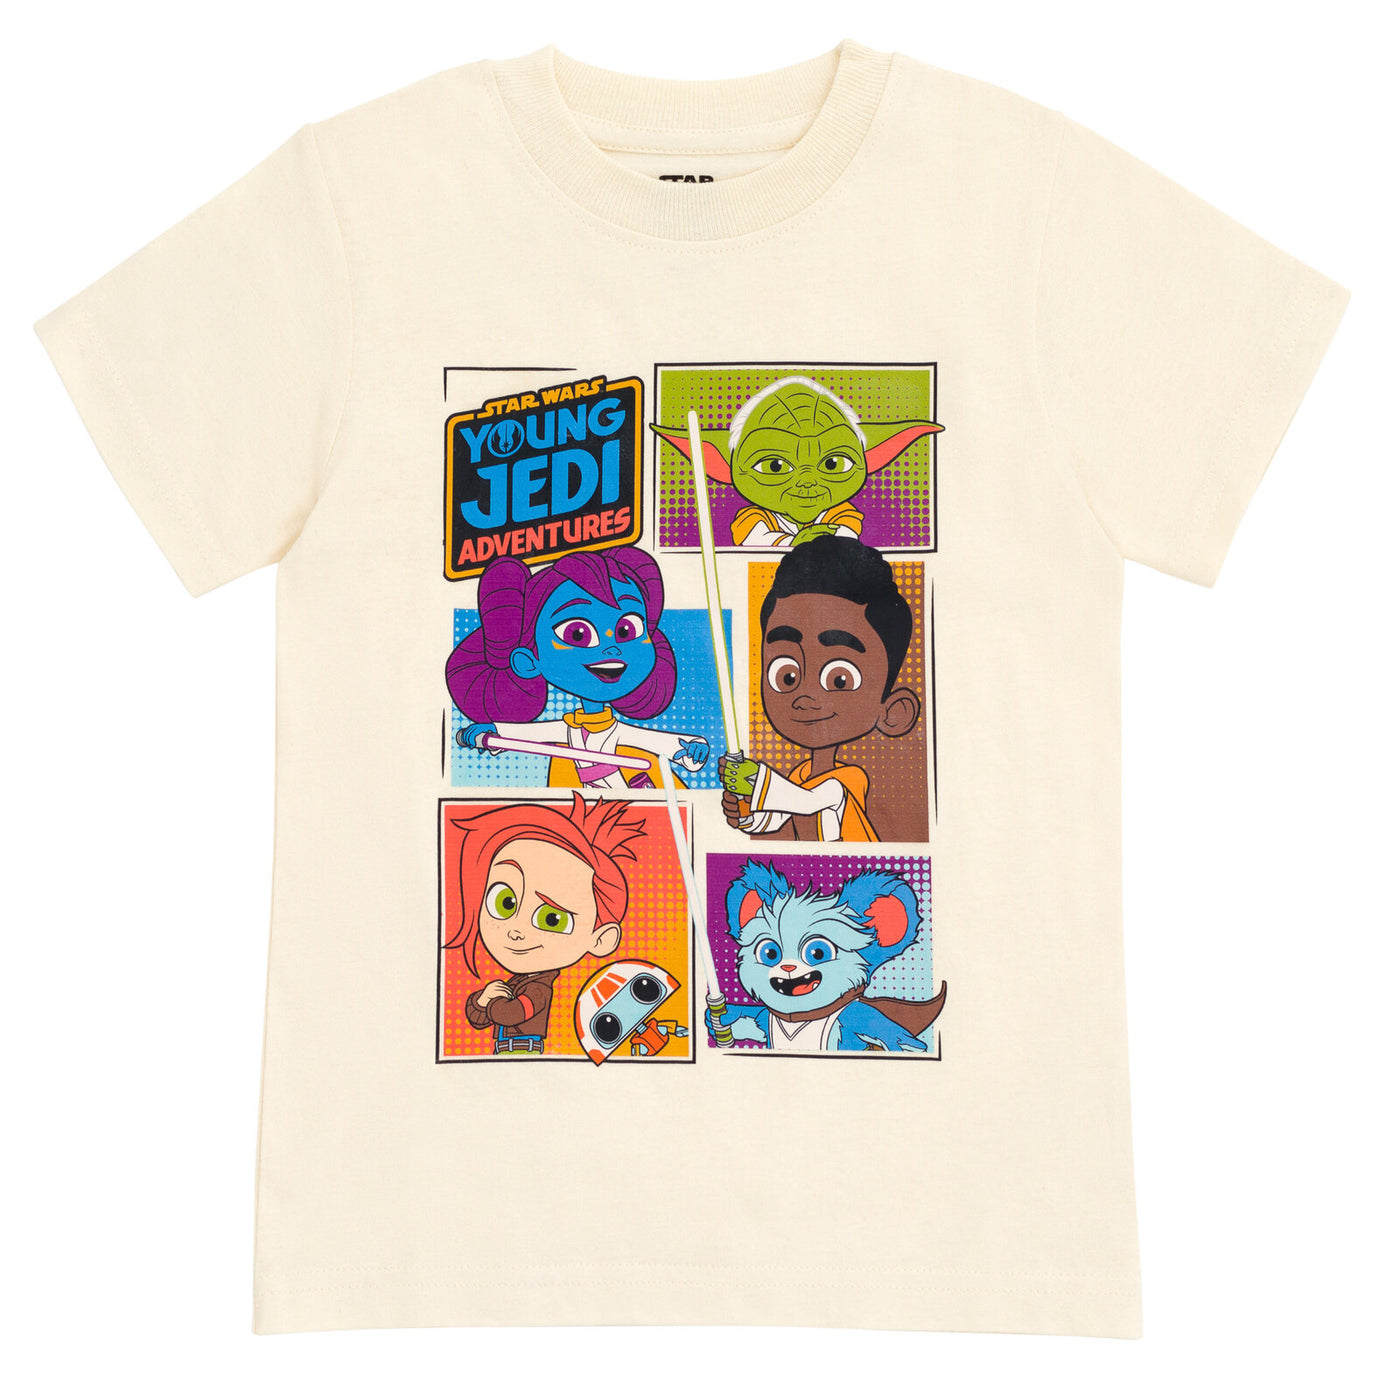 STAR WARS Young Jedi Adventures 2 Pack T-Shirts